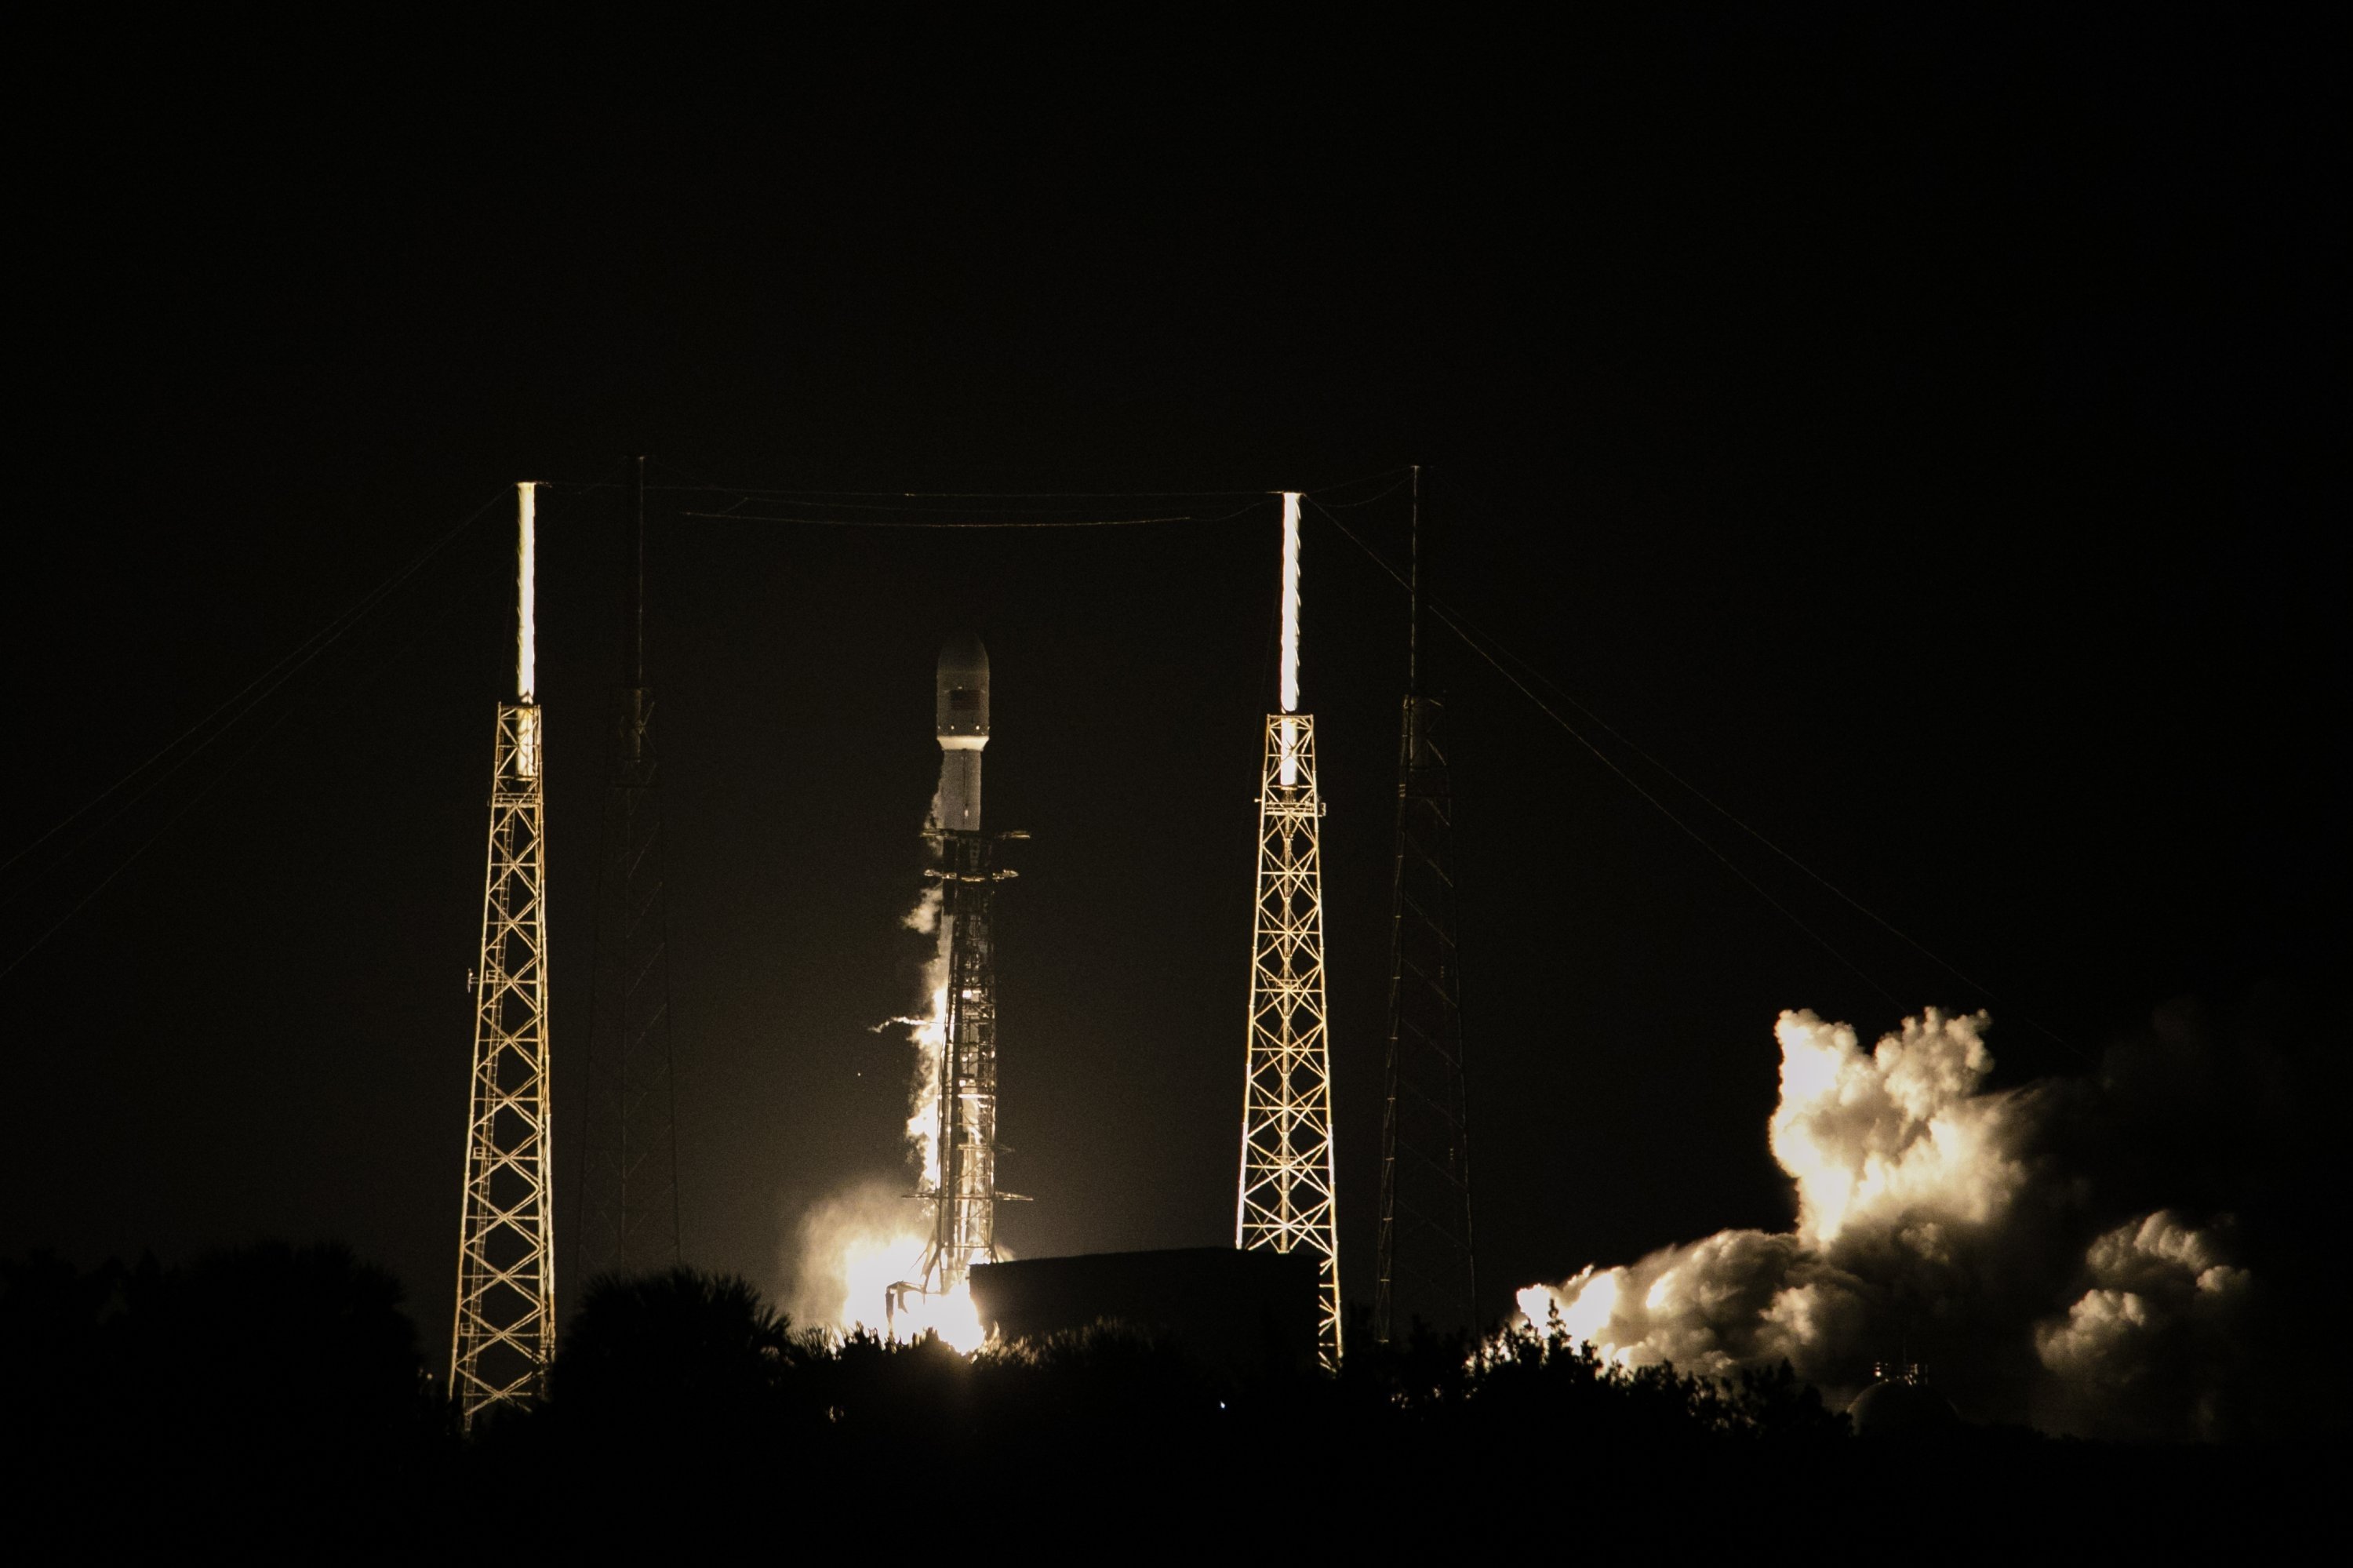 Turkey's new satellite, Türksat 5A, carried by a SpaceX Falcon 9 rocket, launches from Cape Canaveral Space Force Station, in Cape Canaveral, Florida, U.S., Jan. 7, 2020. (AA Photo)